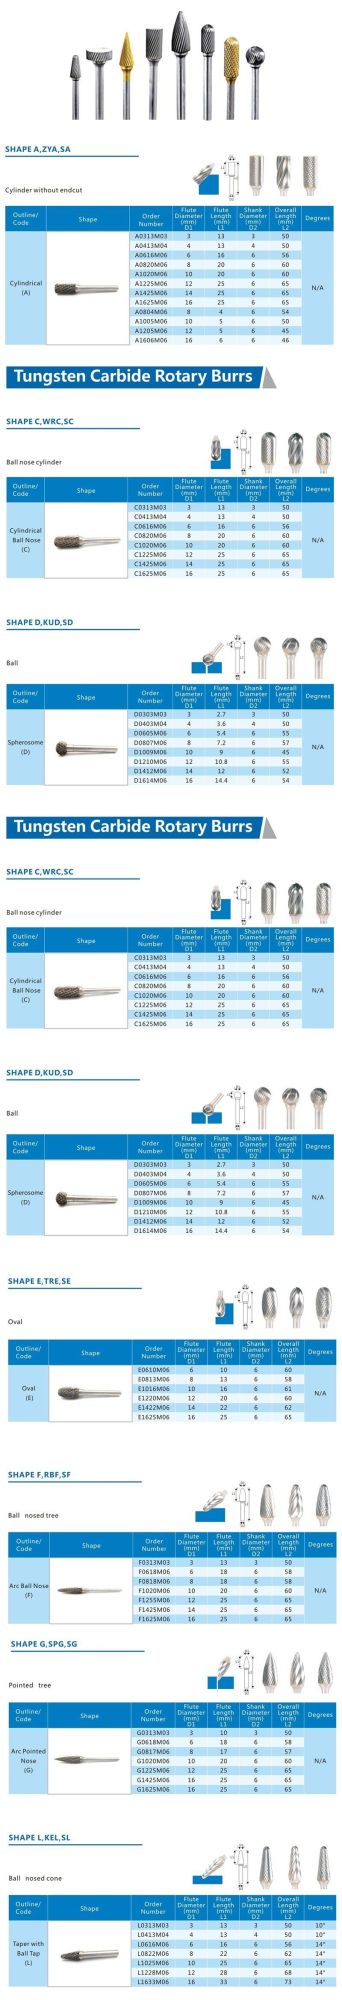 Cemented Carbide Drill Bit for Grinding Stainless Steel